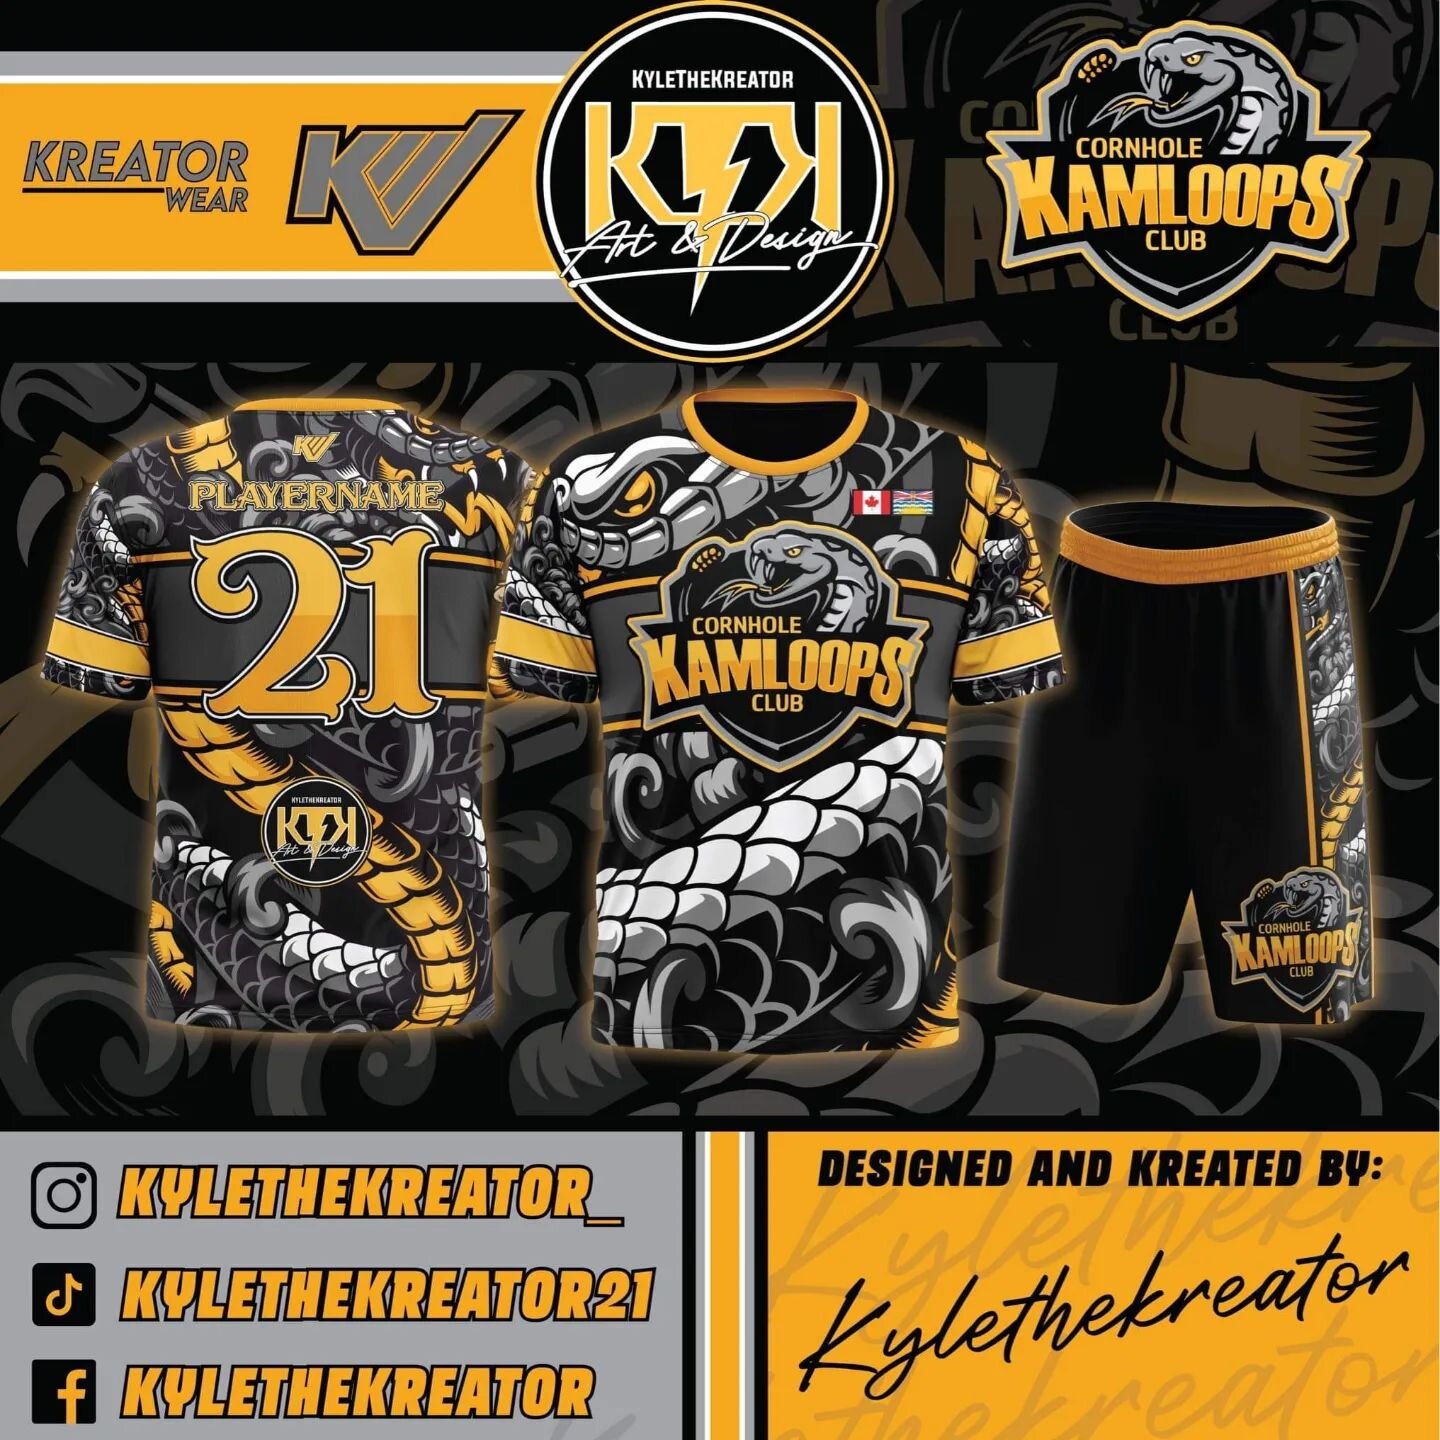 Last day to order jerseys and shorts. Send me a message. Or email me at jrlundman@gmail.com